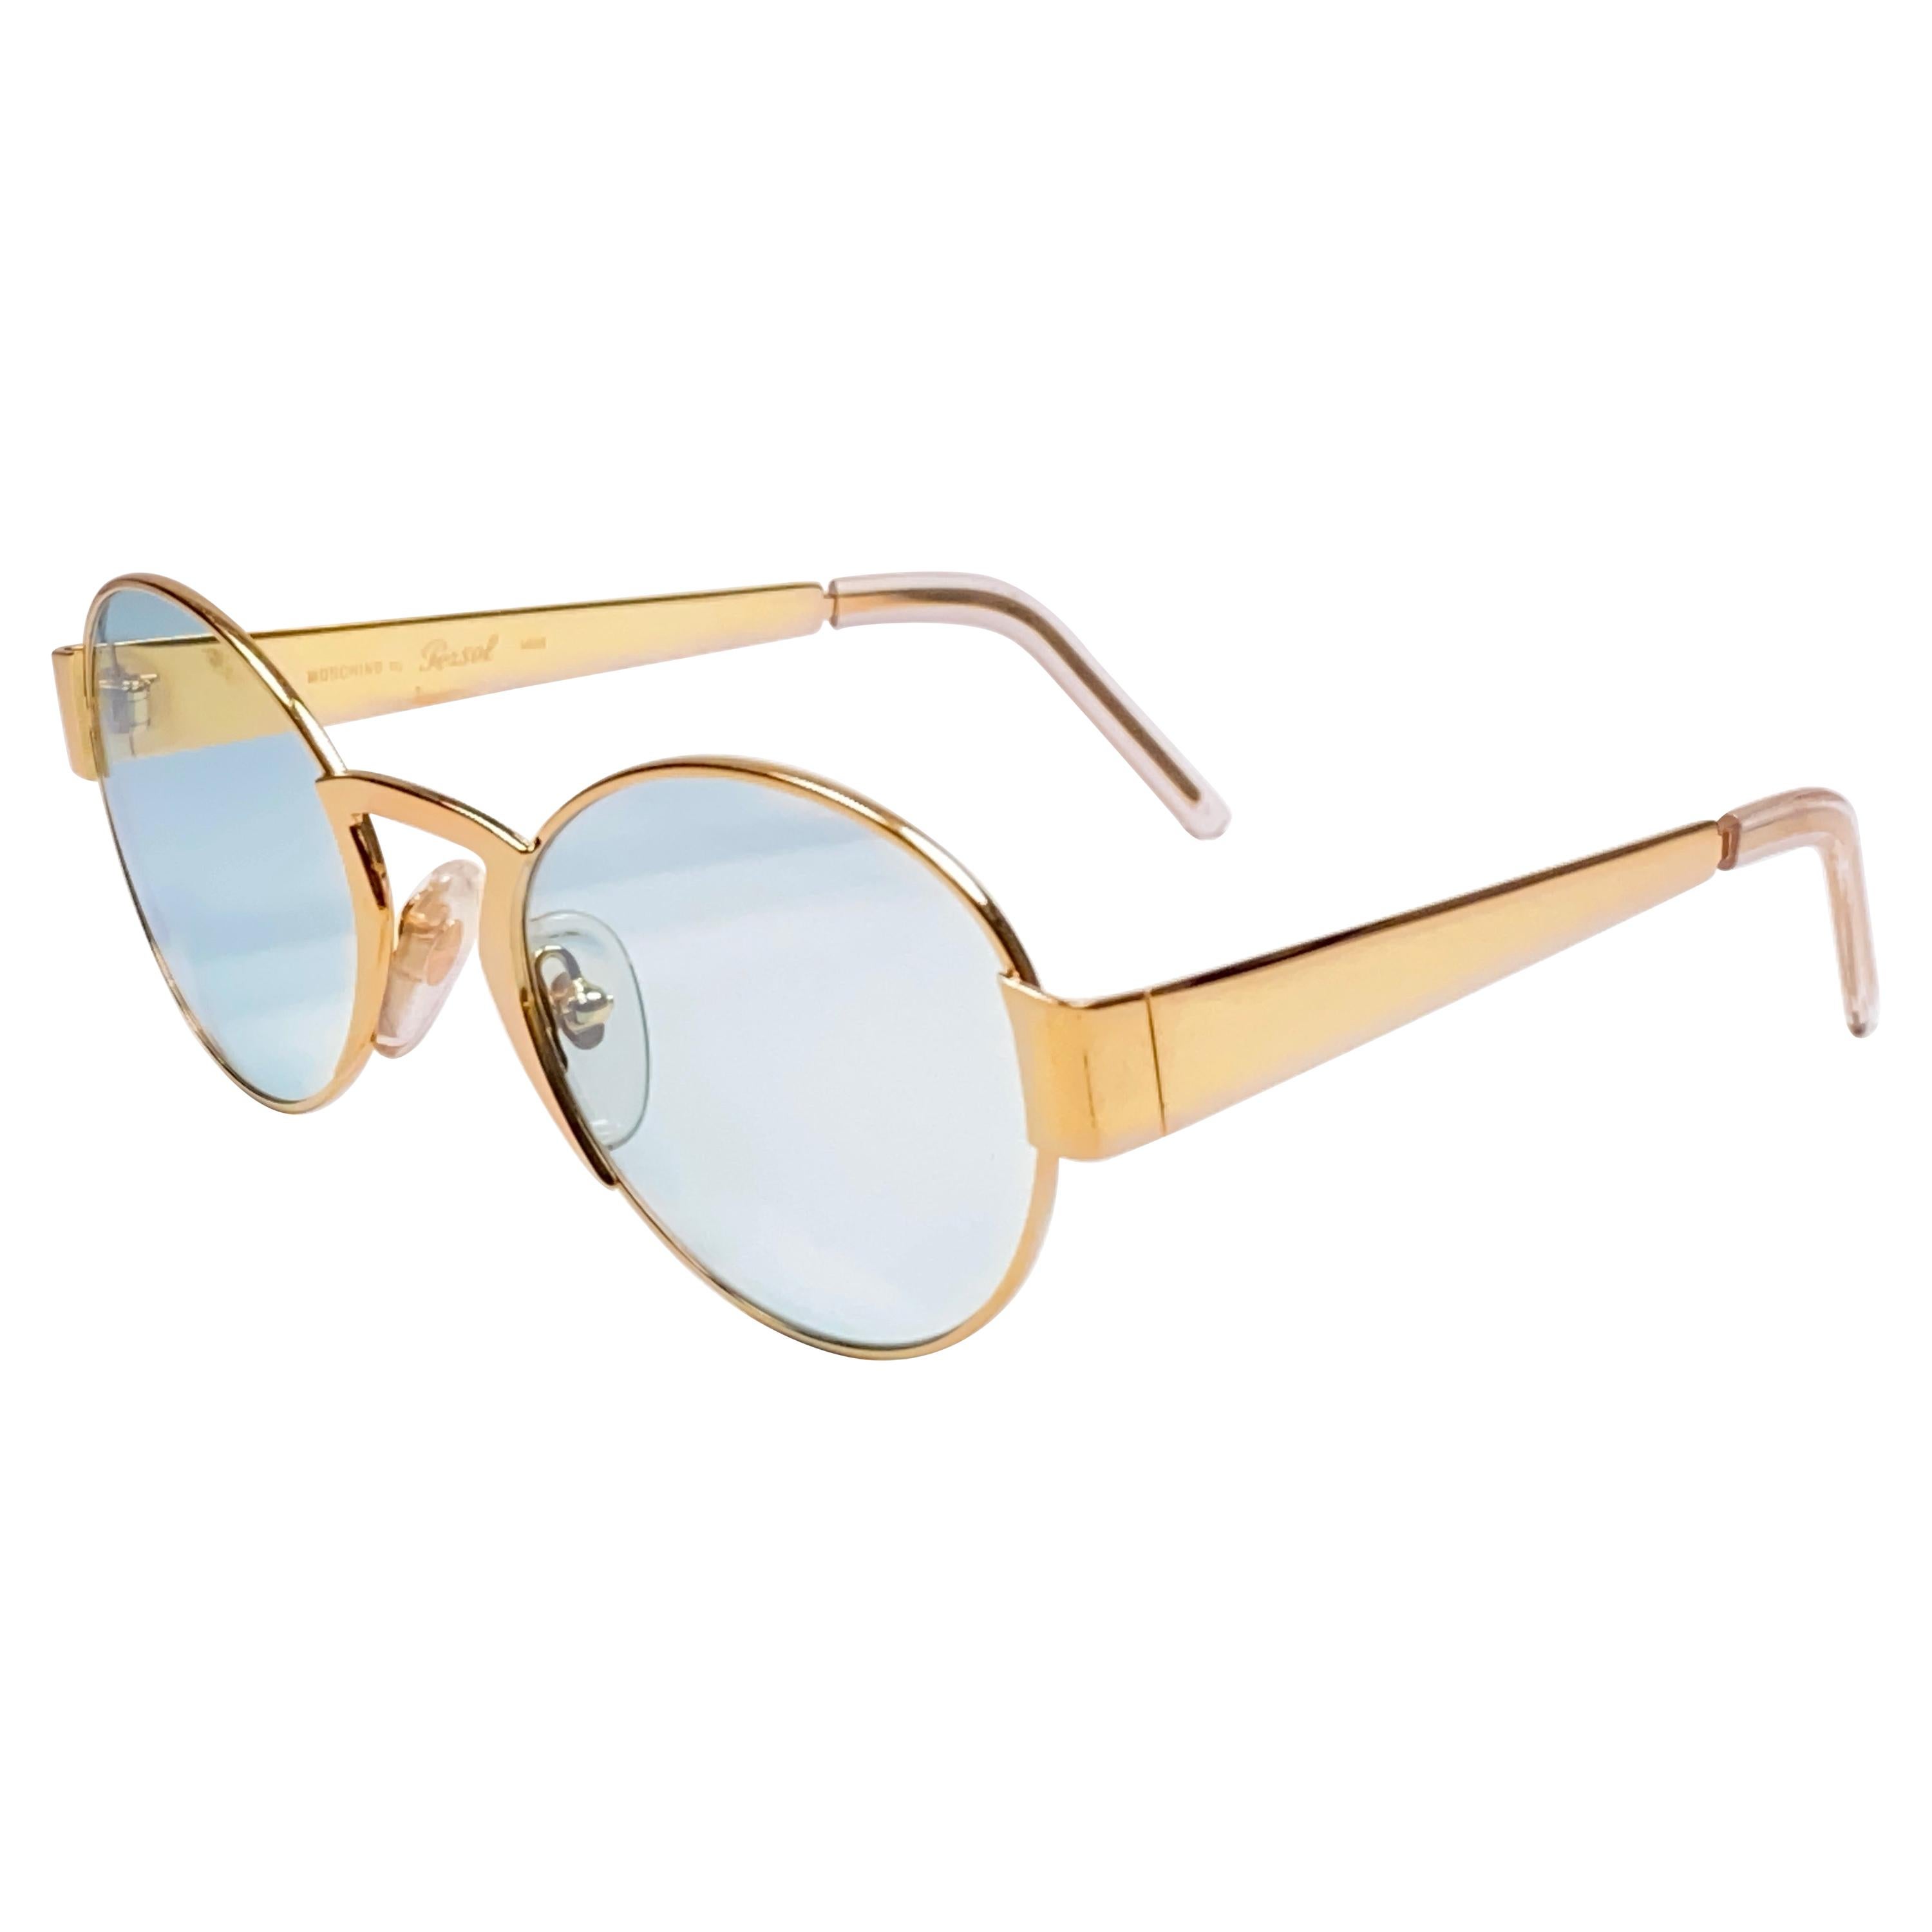 New Vintage Moschino By Persol M08 Frame Medium Round Gold Sunglasses 